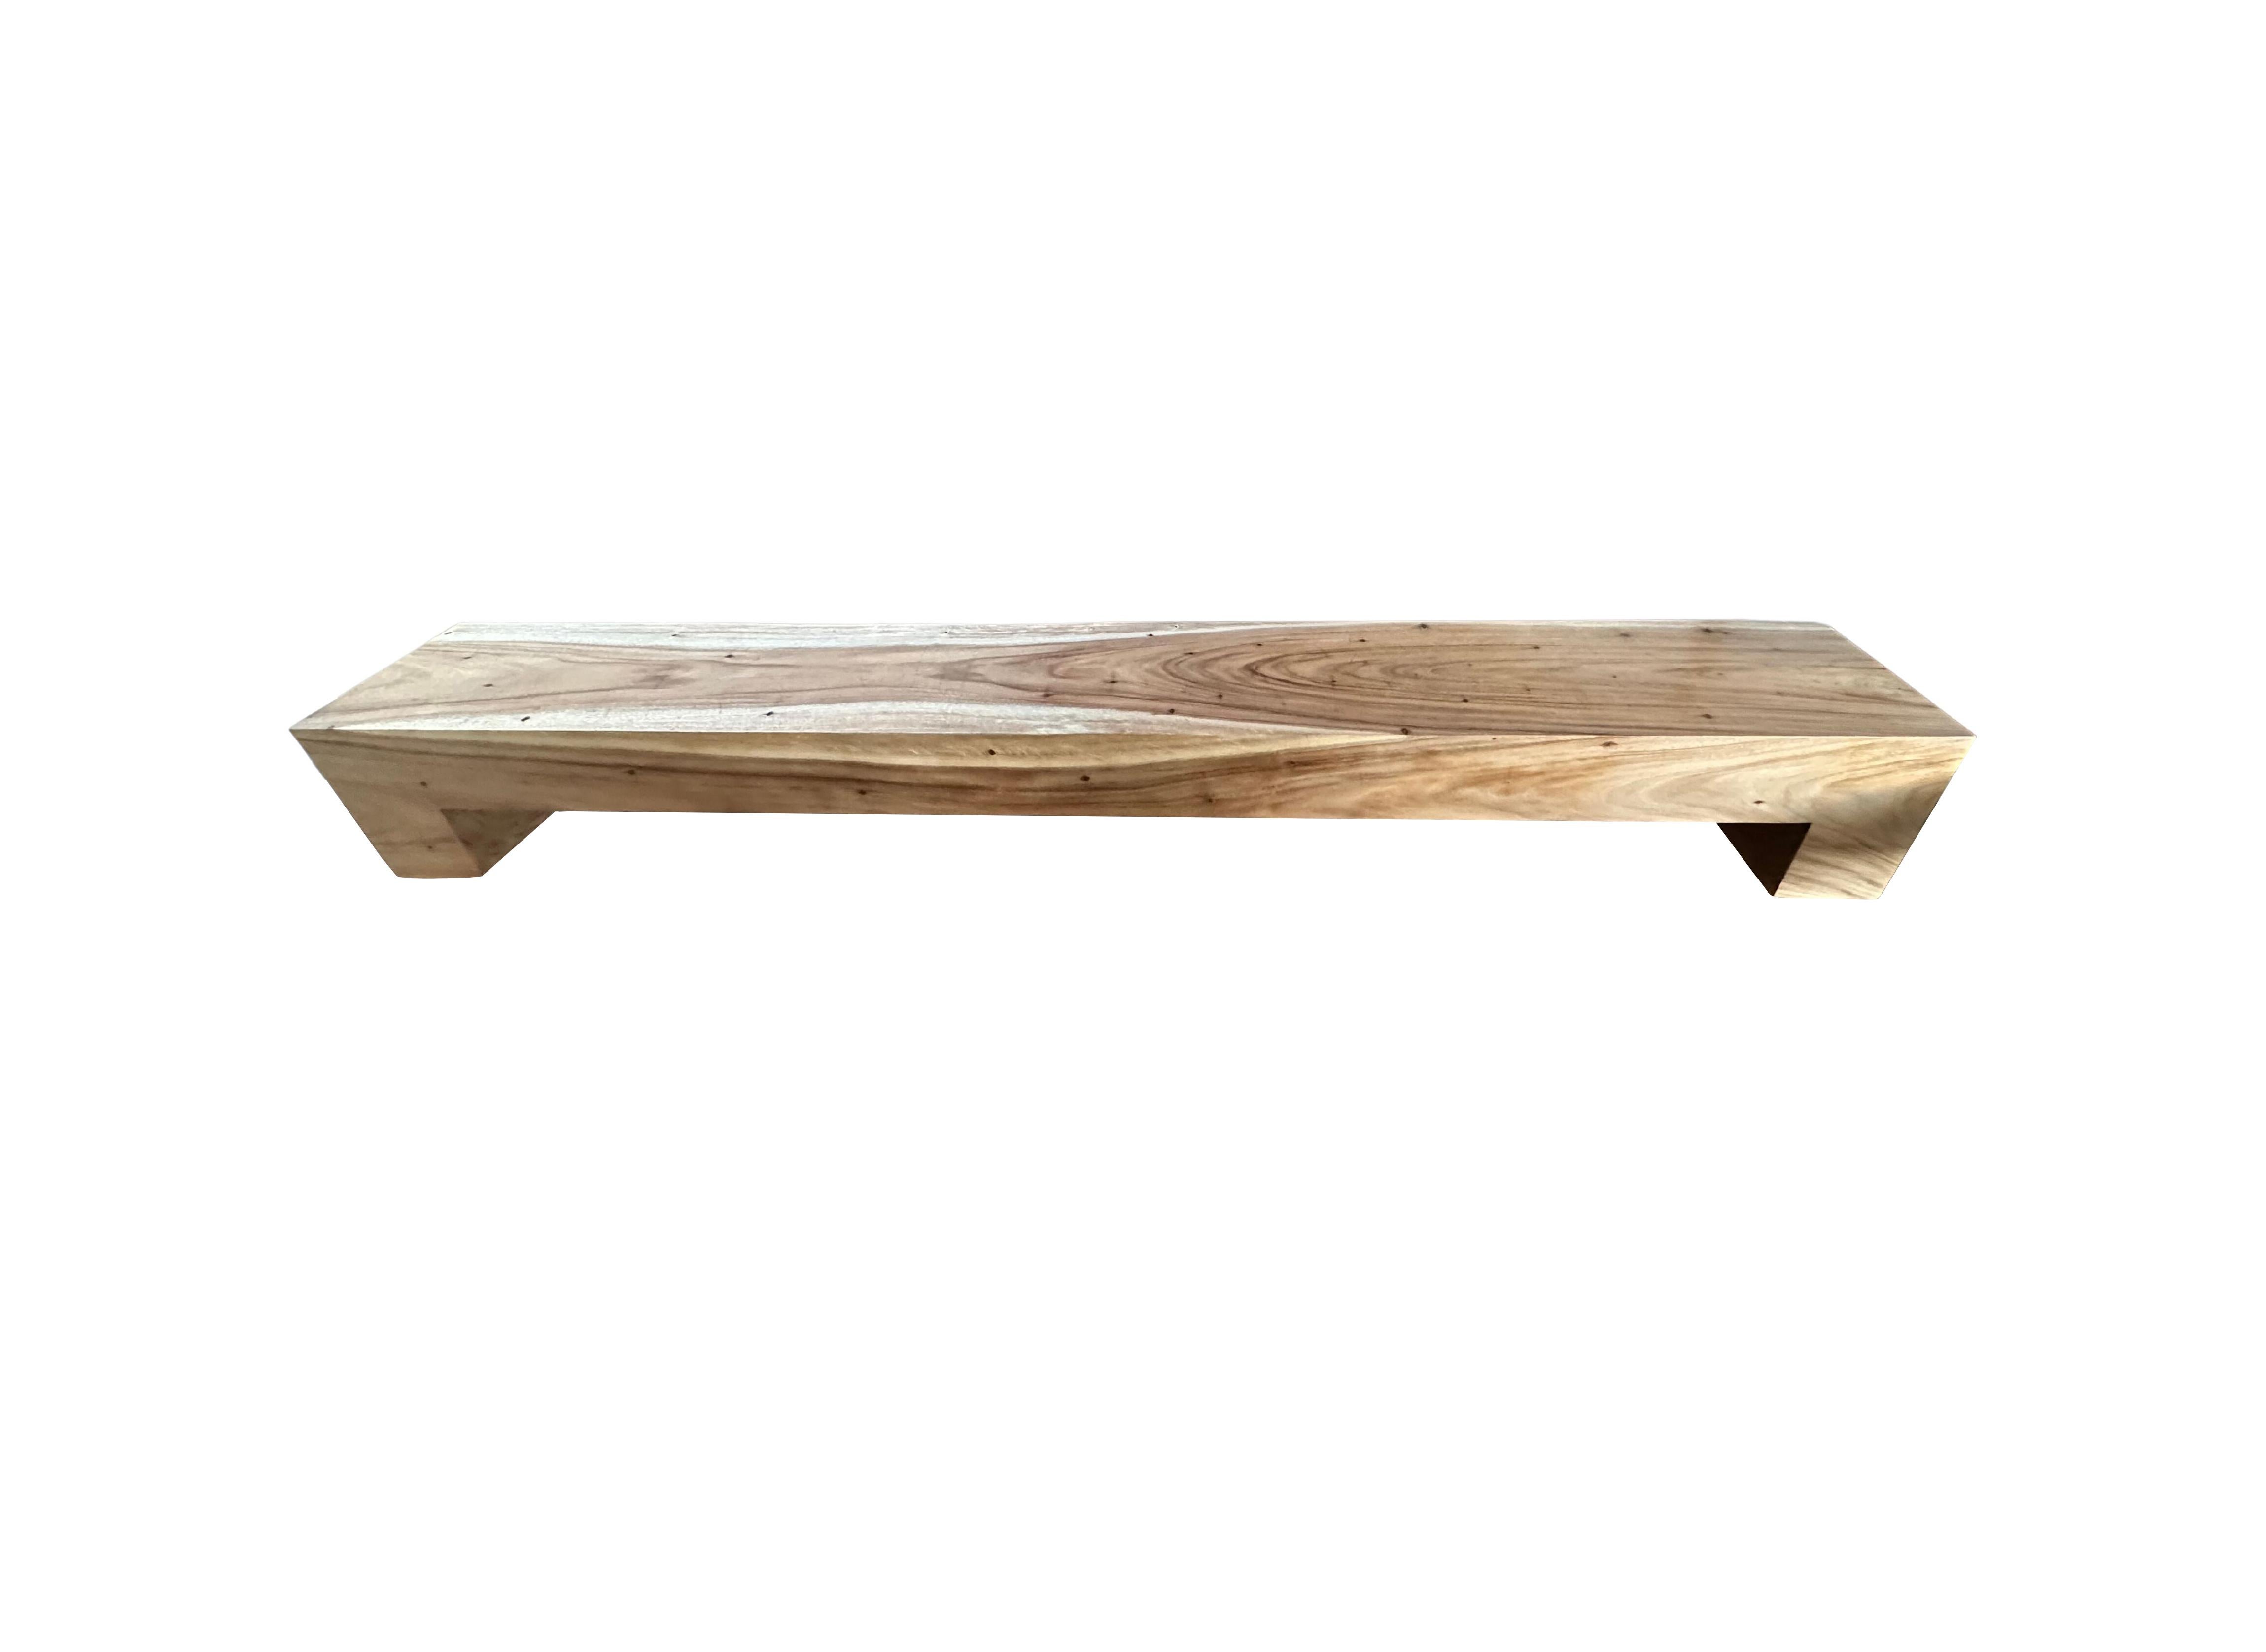 Other Very Long Sculptural Solid Suar Wood Bench Modern Organic For Sale